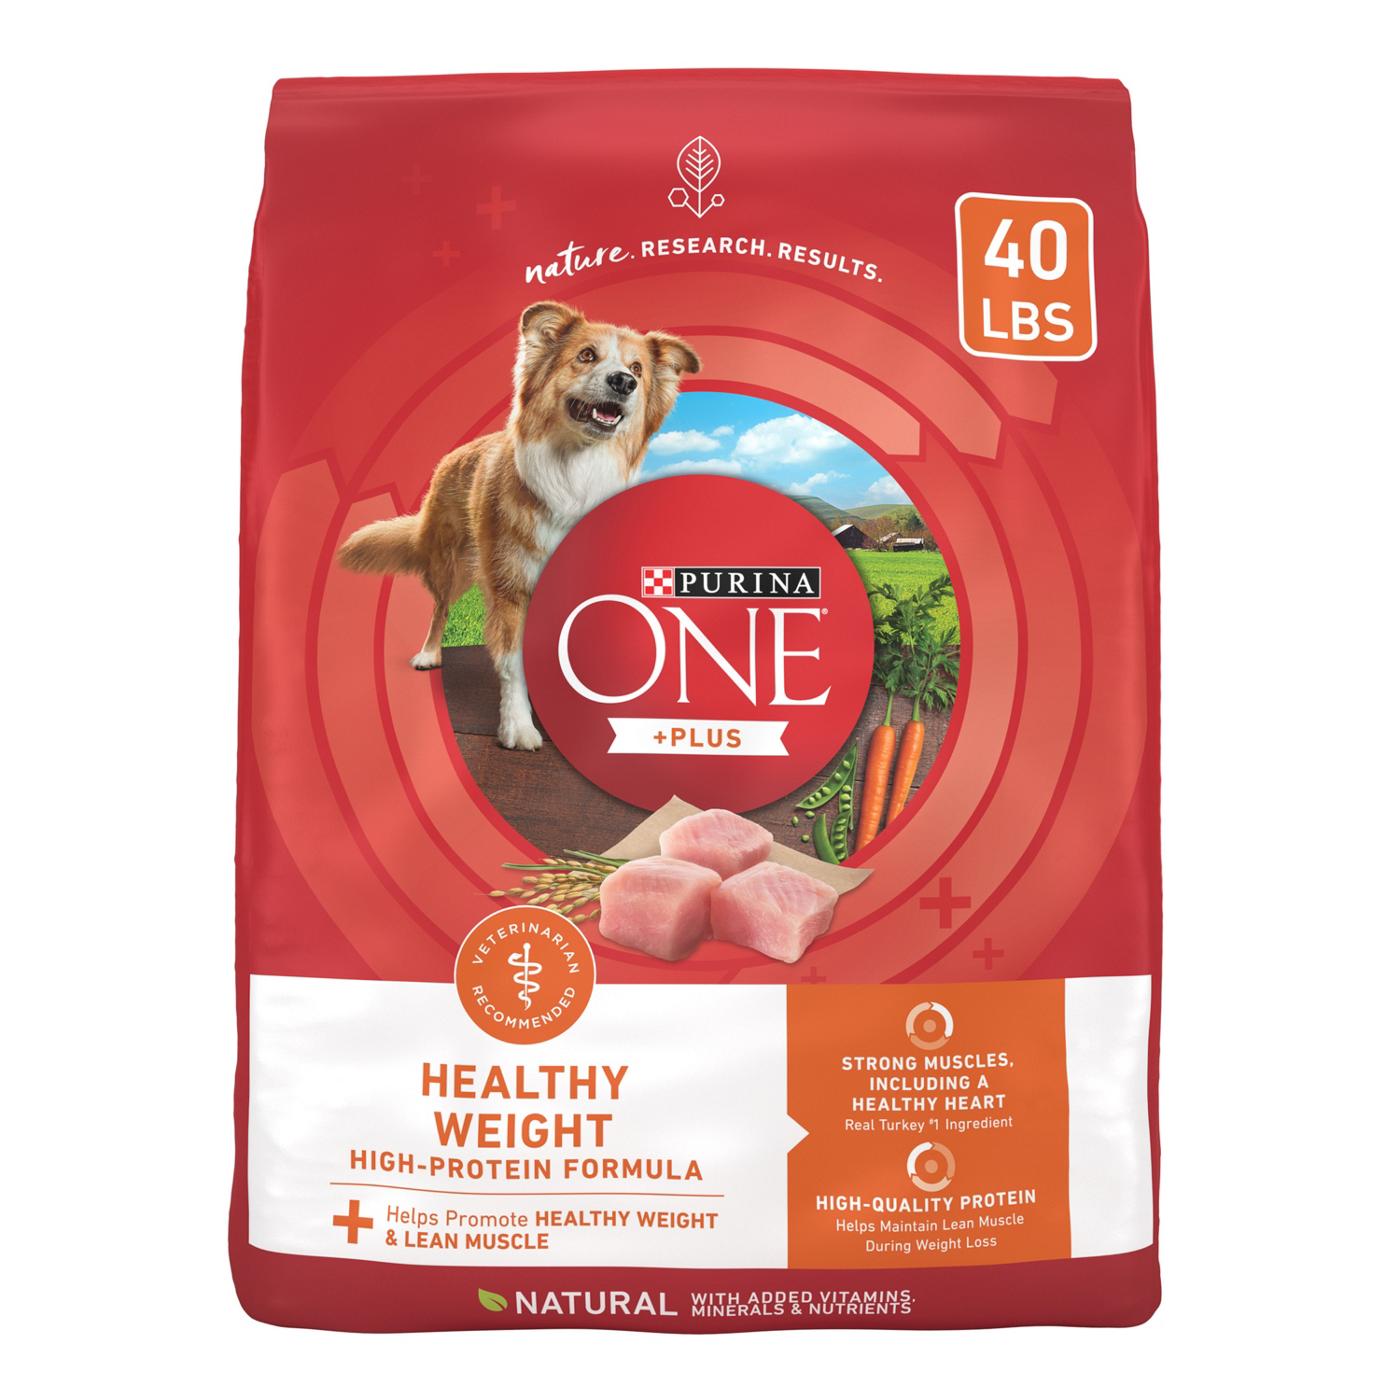 Purina ONE Purina ONE Plus Healthy Weight High-Protein Dog Food Dry Formula; image 1 of 6